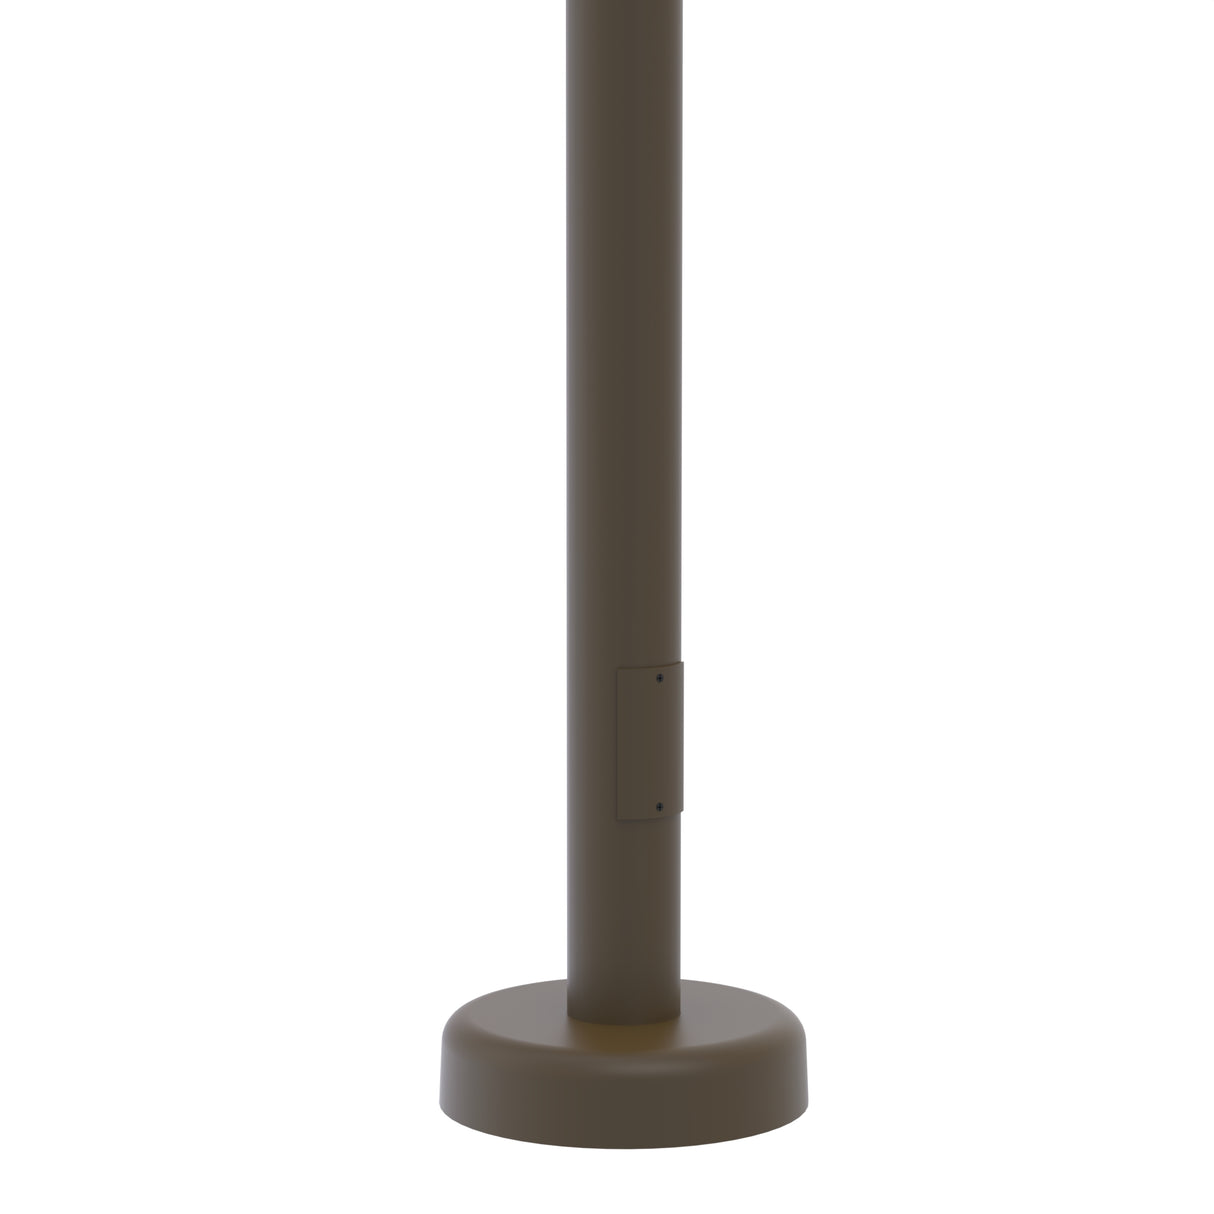 16' Tall x 5.0" OD x 0.188" Thick, Round Straight Aluminum, Hinged Anchor Base Light Pole